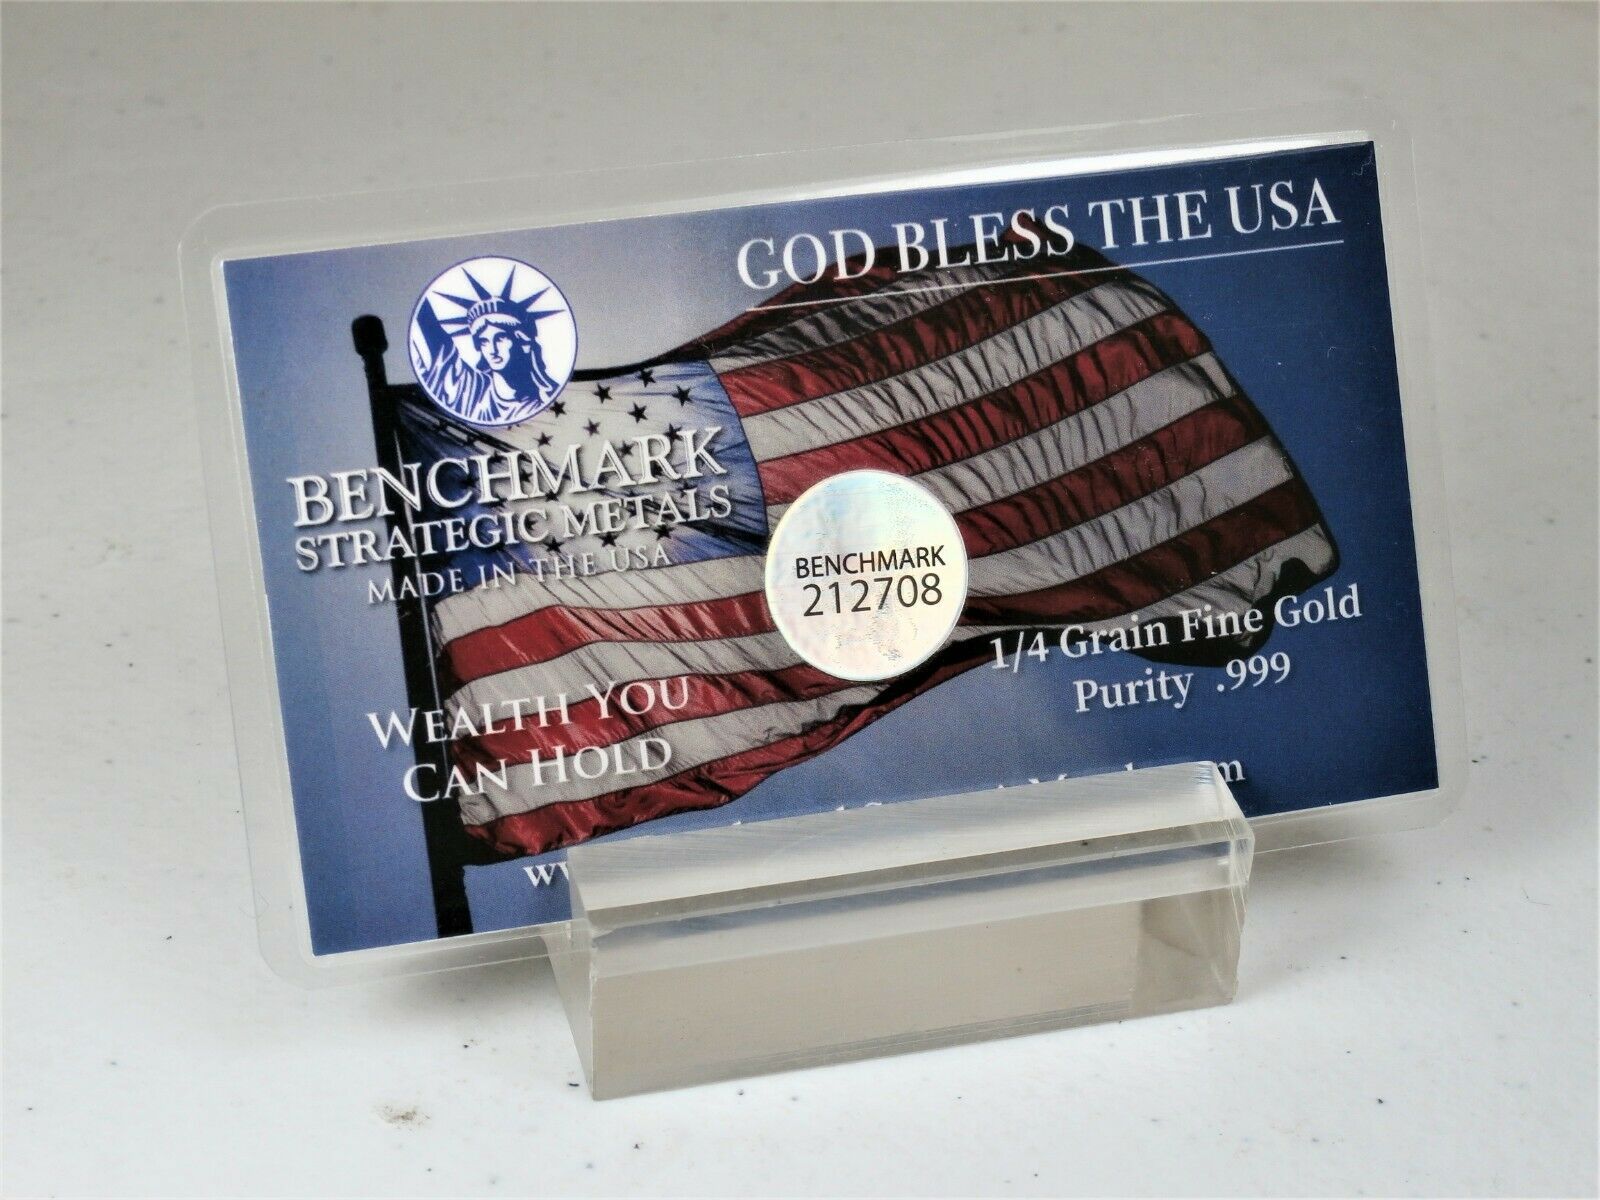 1/60 GRAM PURE GOLD "THANK YOU TO THOSE WHO HAVE SERVED" 999 FINE GOLD A23 